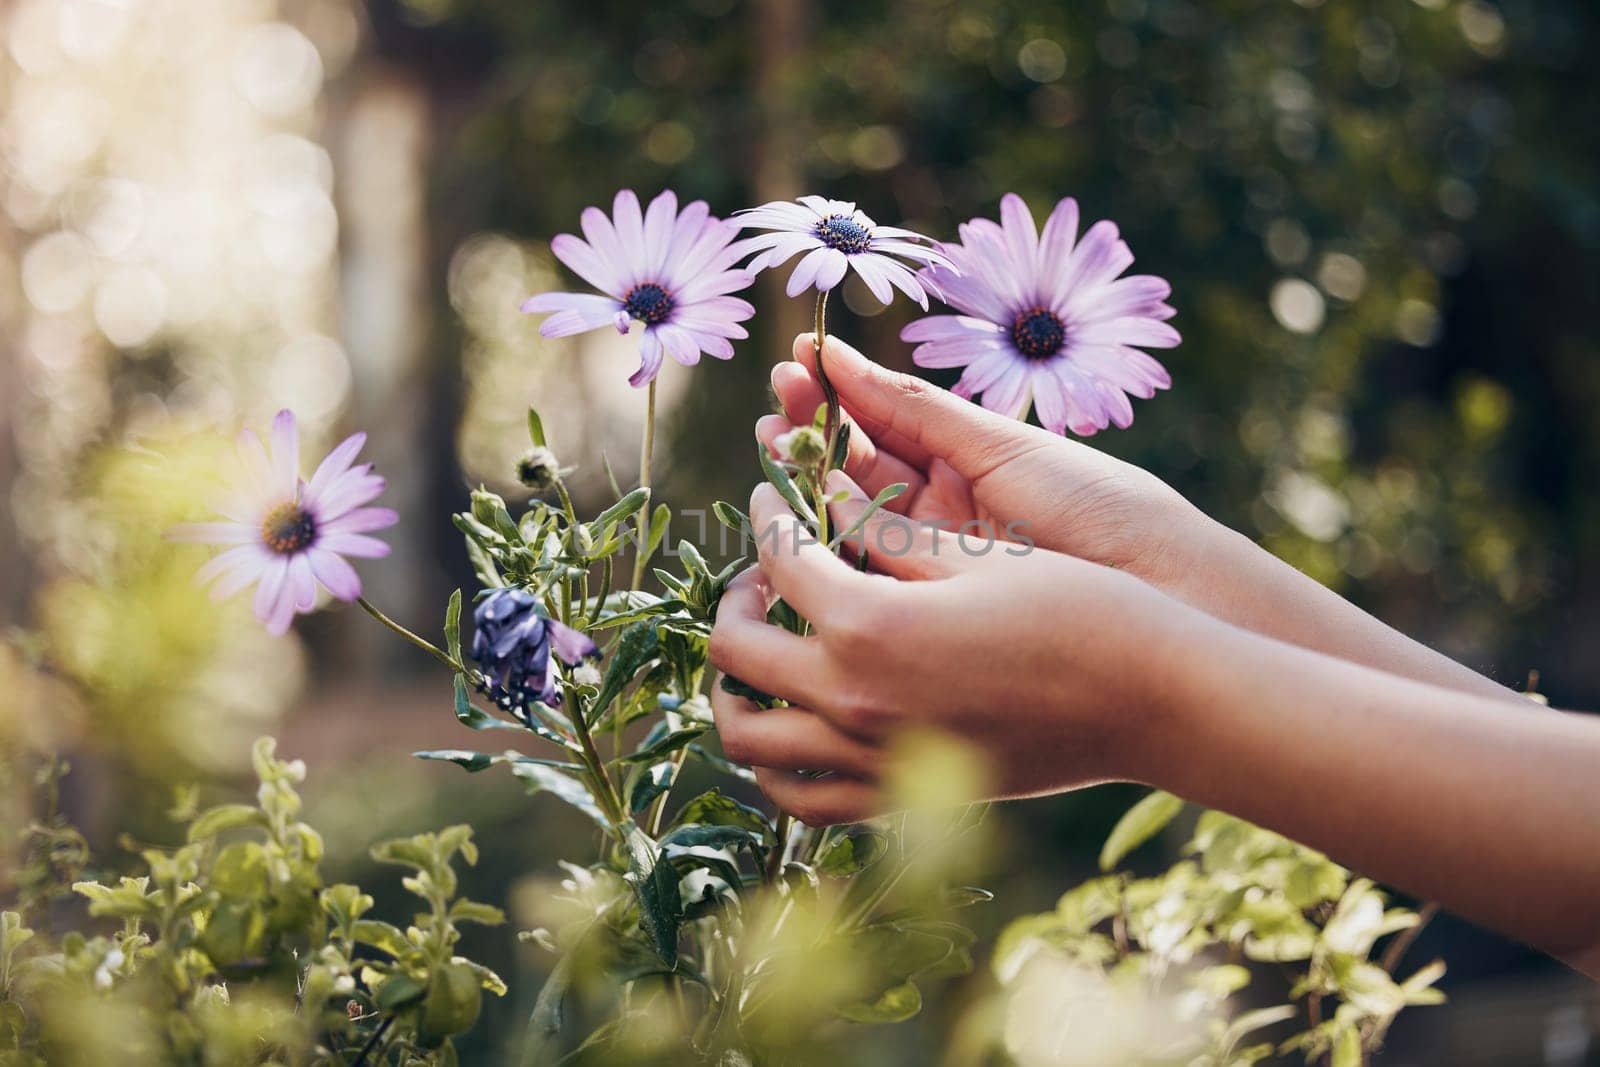 Daisy flowers, hands and nature in outdoor garden for zen, calm and aromatherapy plants. Landscaping, sustainability and female person with aroma for anxiety, stress and a peaceful mind with bokeh.